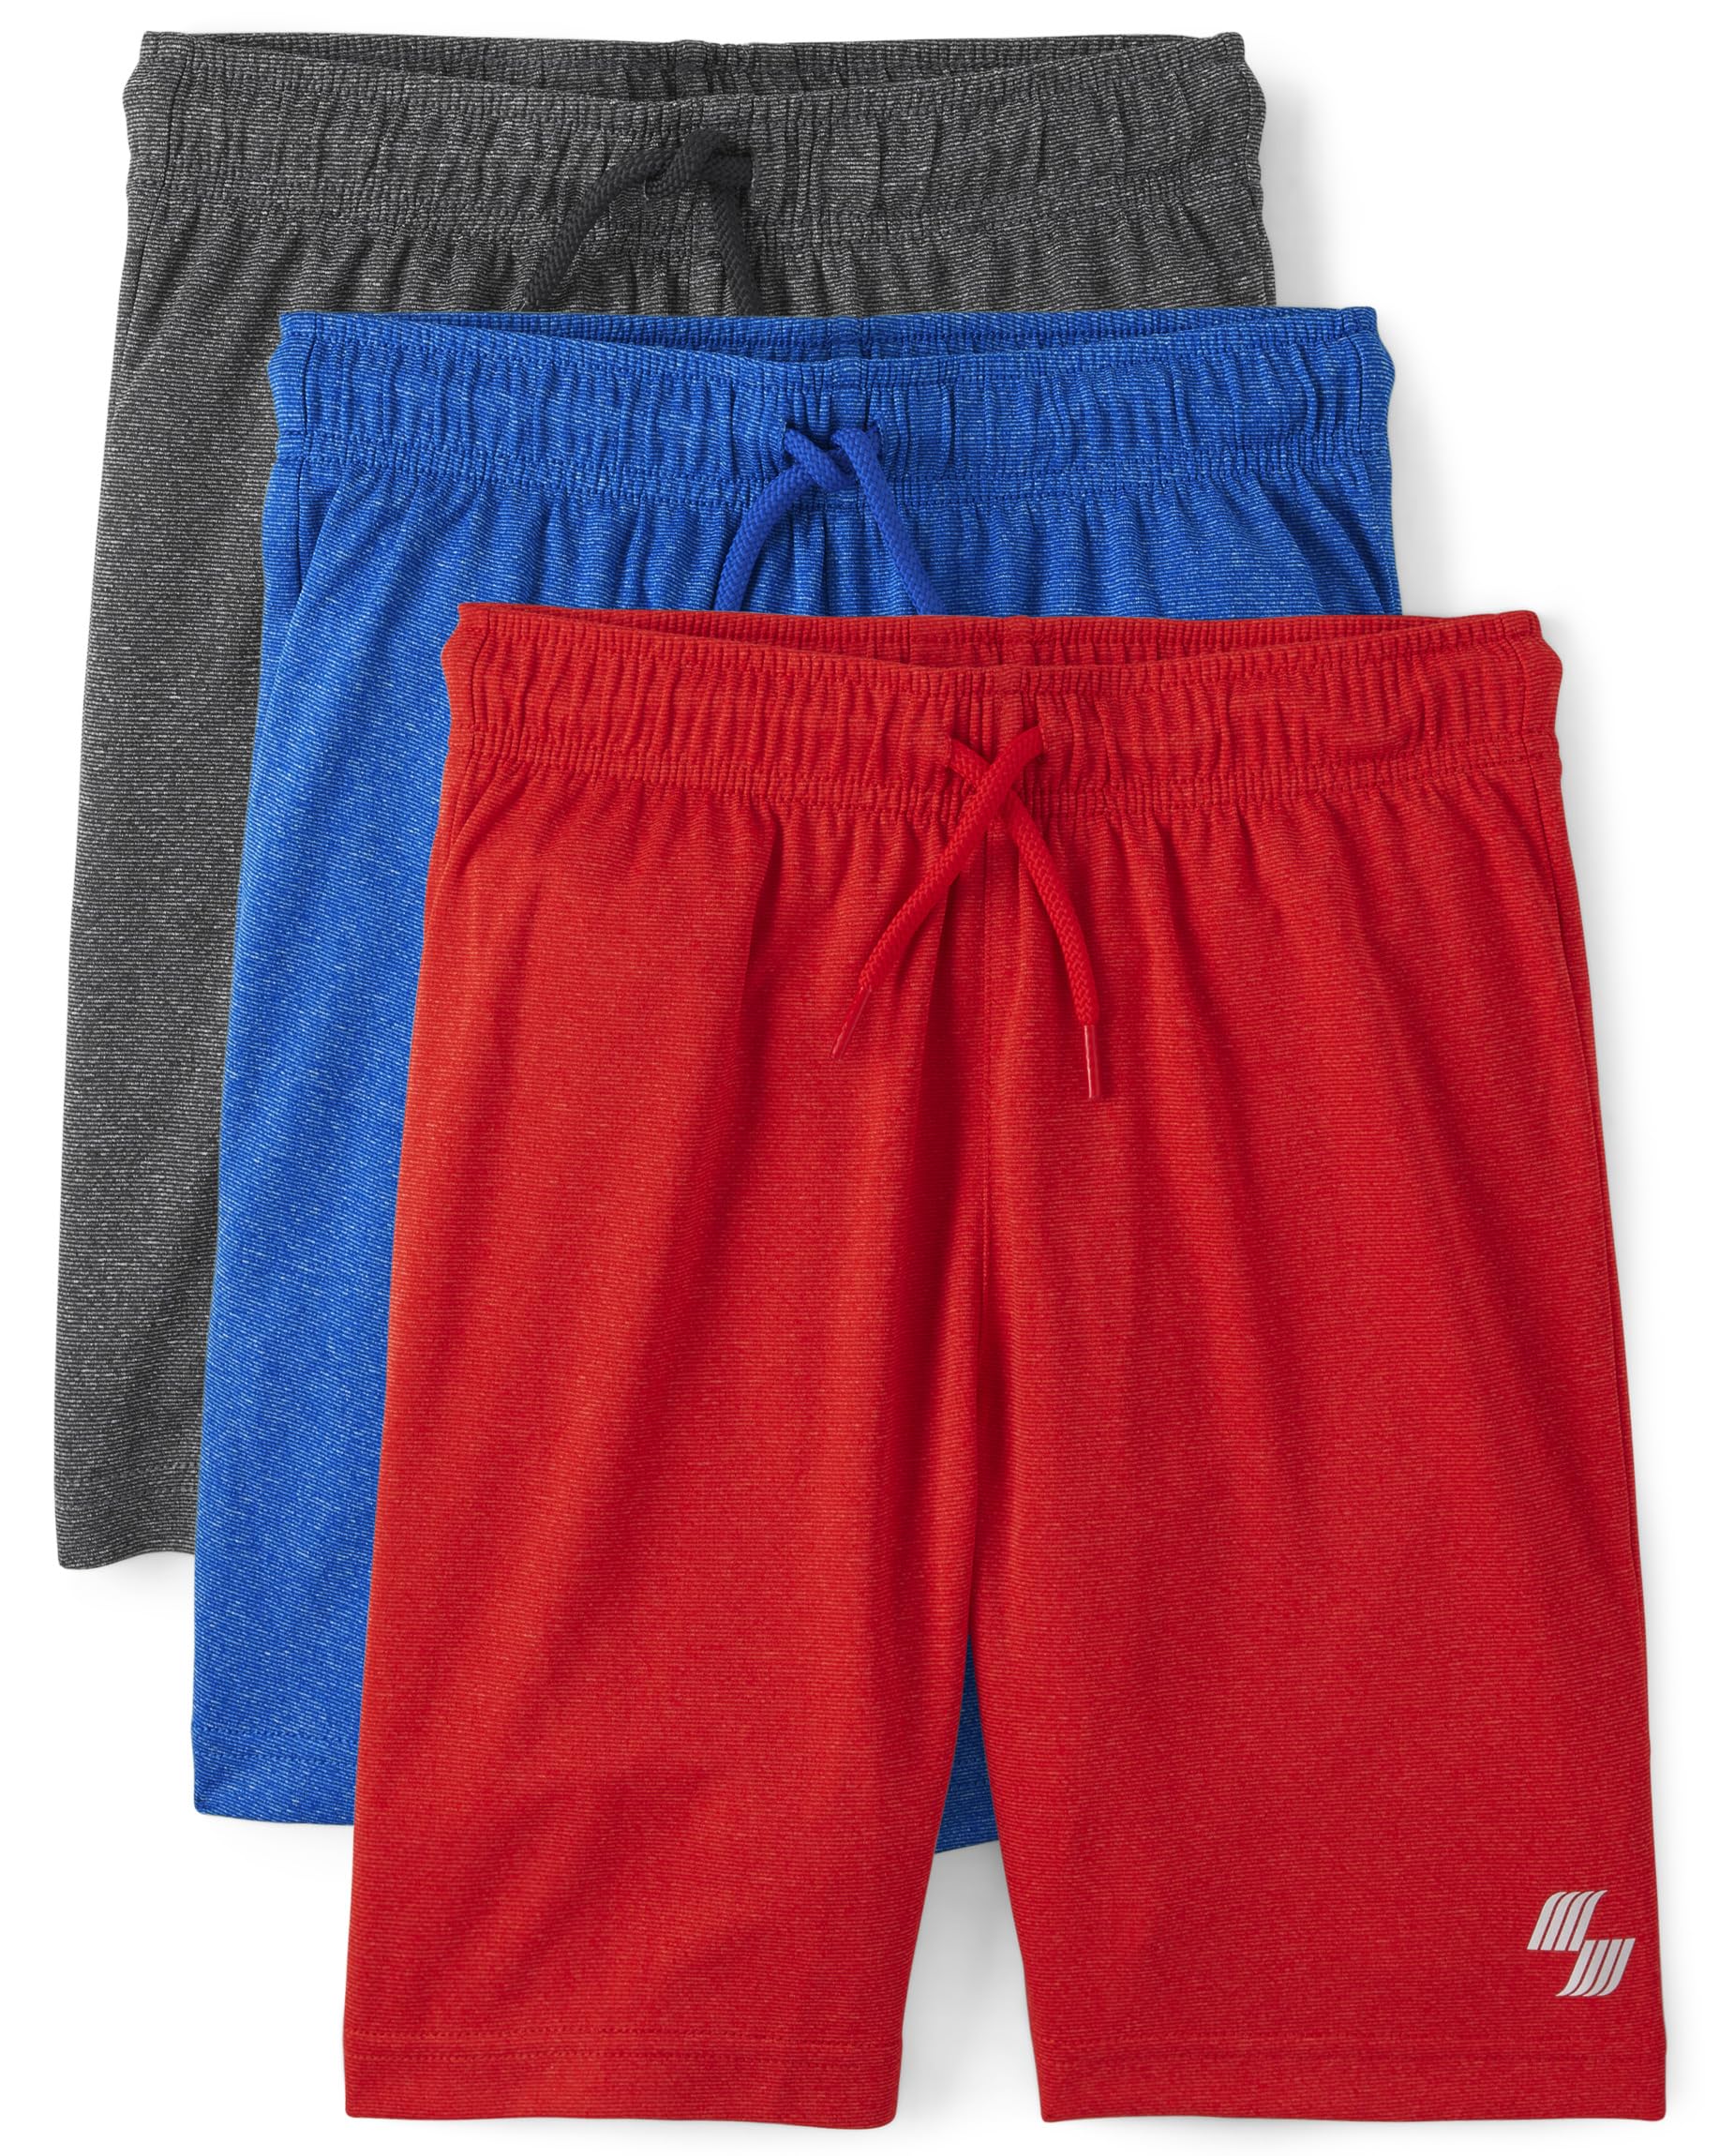 The Children's Place Boys' Athletic Basketball Shorts, 3 Pack